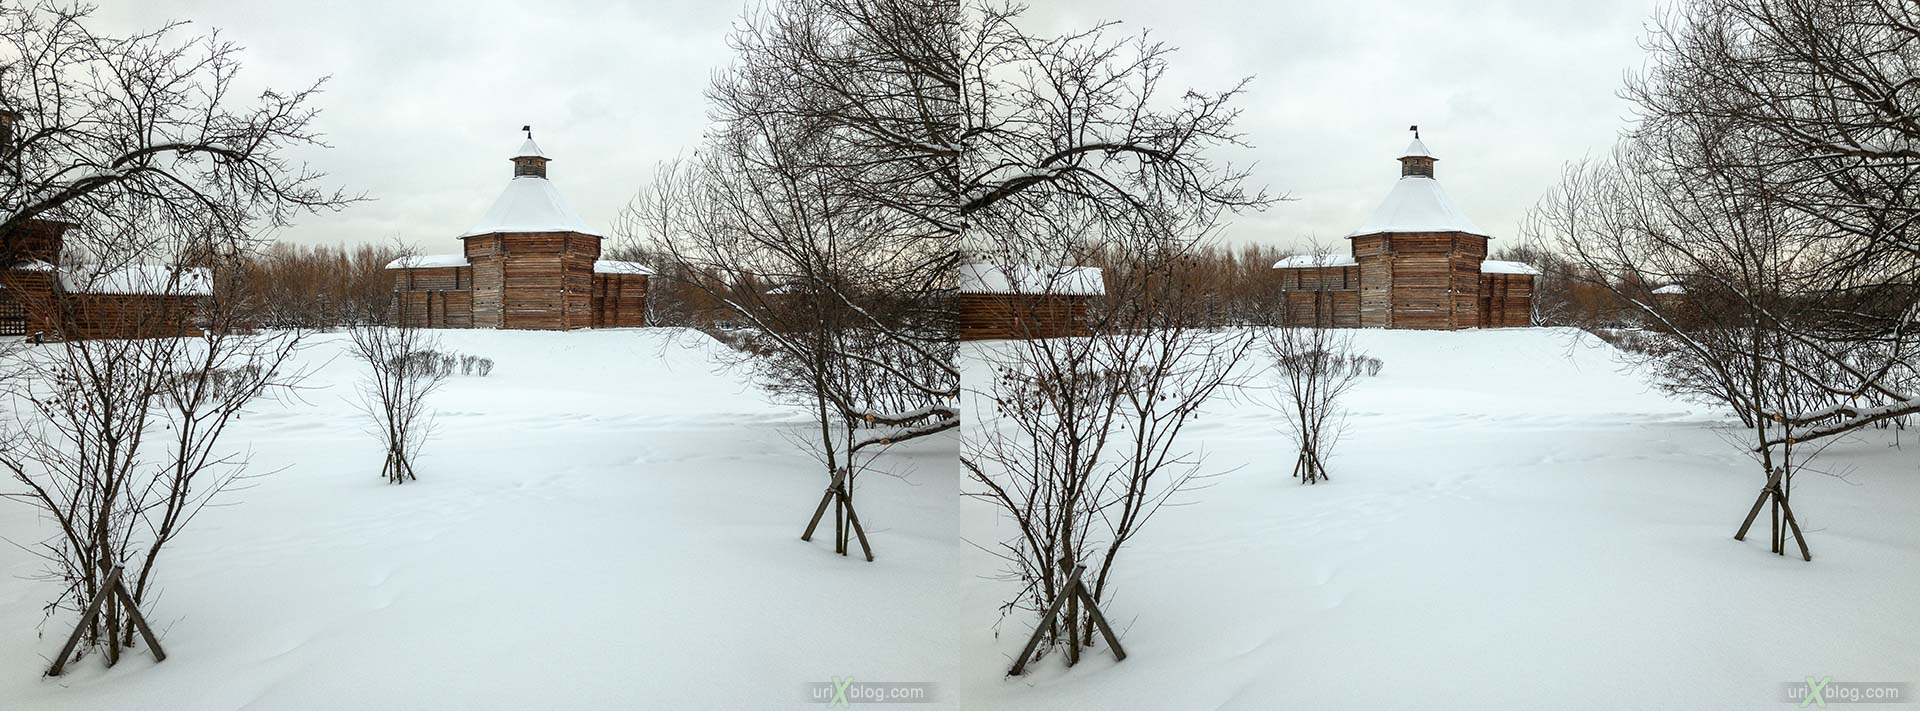 Russian Wooden Architecture, Mokhovaya (Moss) tower, Kolomenskoye, park, wooden building, winter, snow, Moscow, Russia, 3D, stereo pair, cross-eyed, crossview, cross view stereo pair, stereoscopic